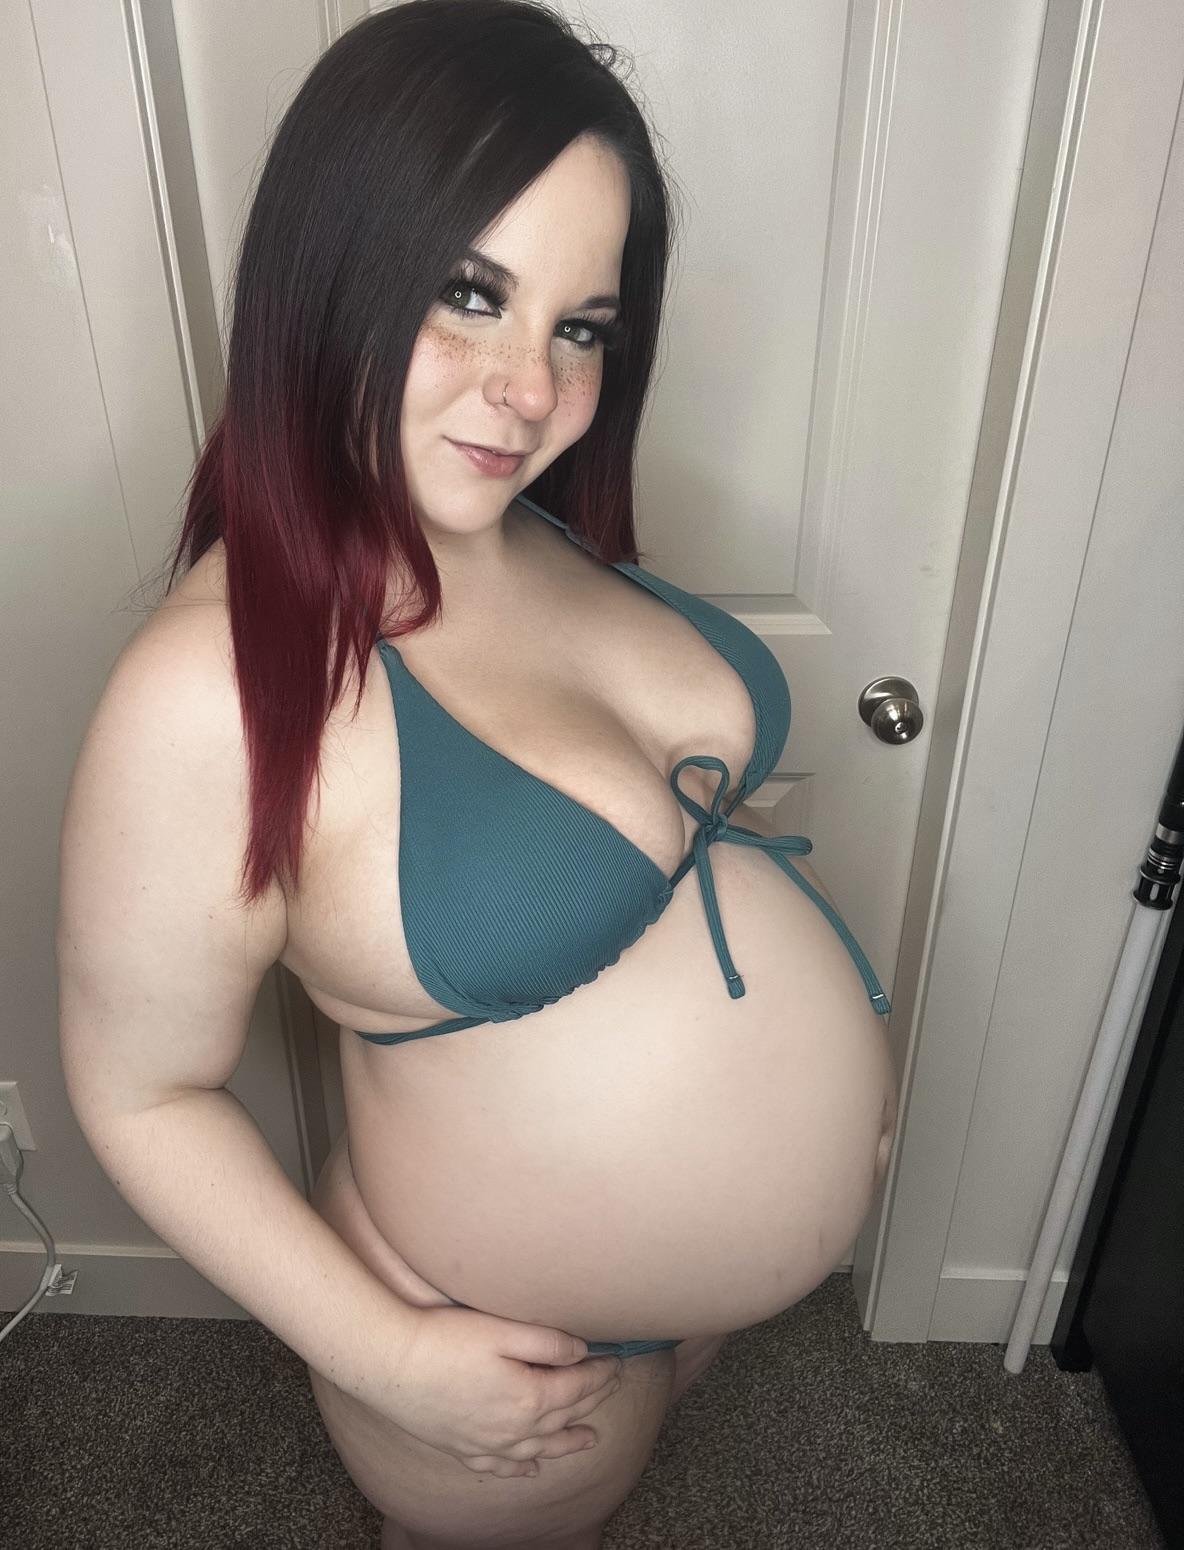 Thicker This pregnancy has made me hornier than ever